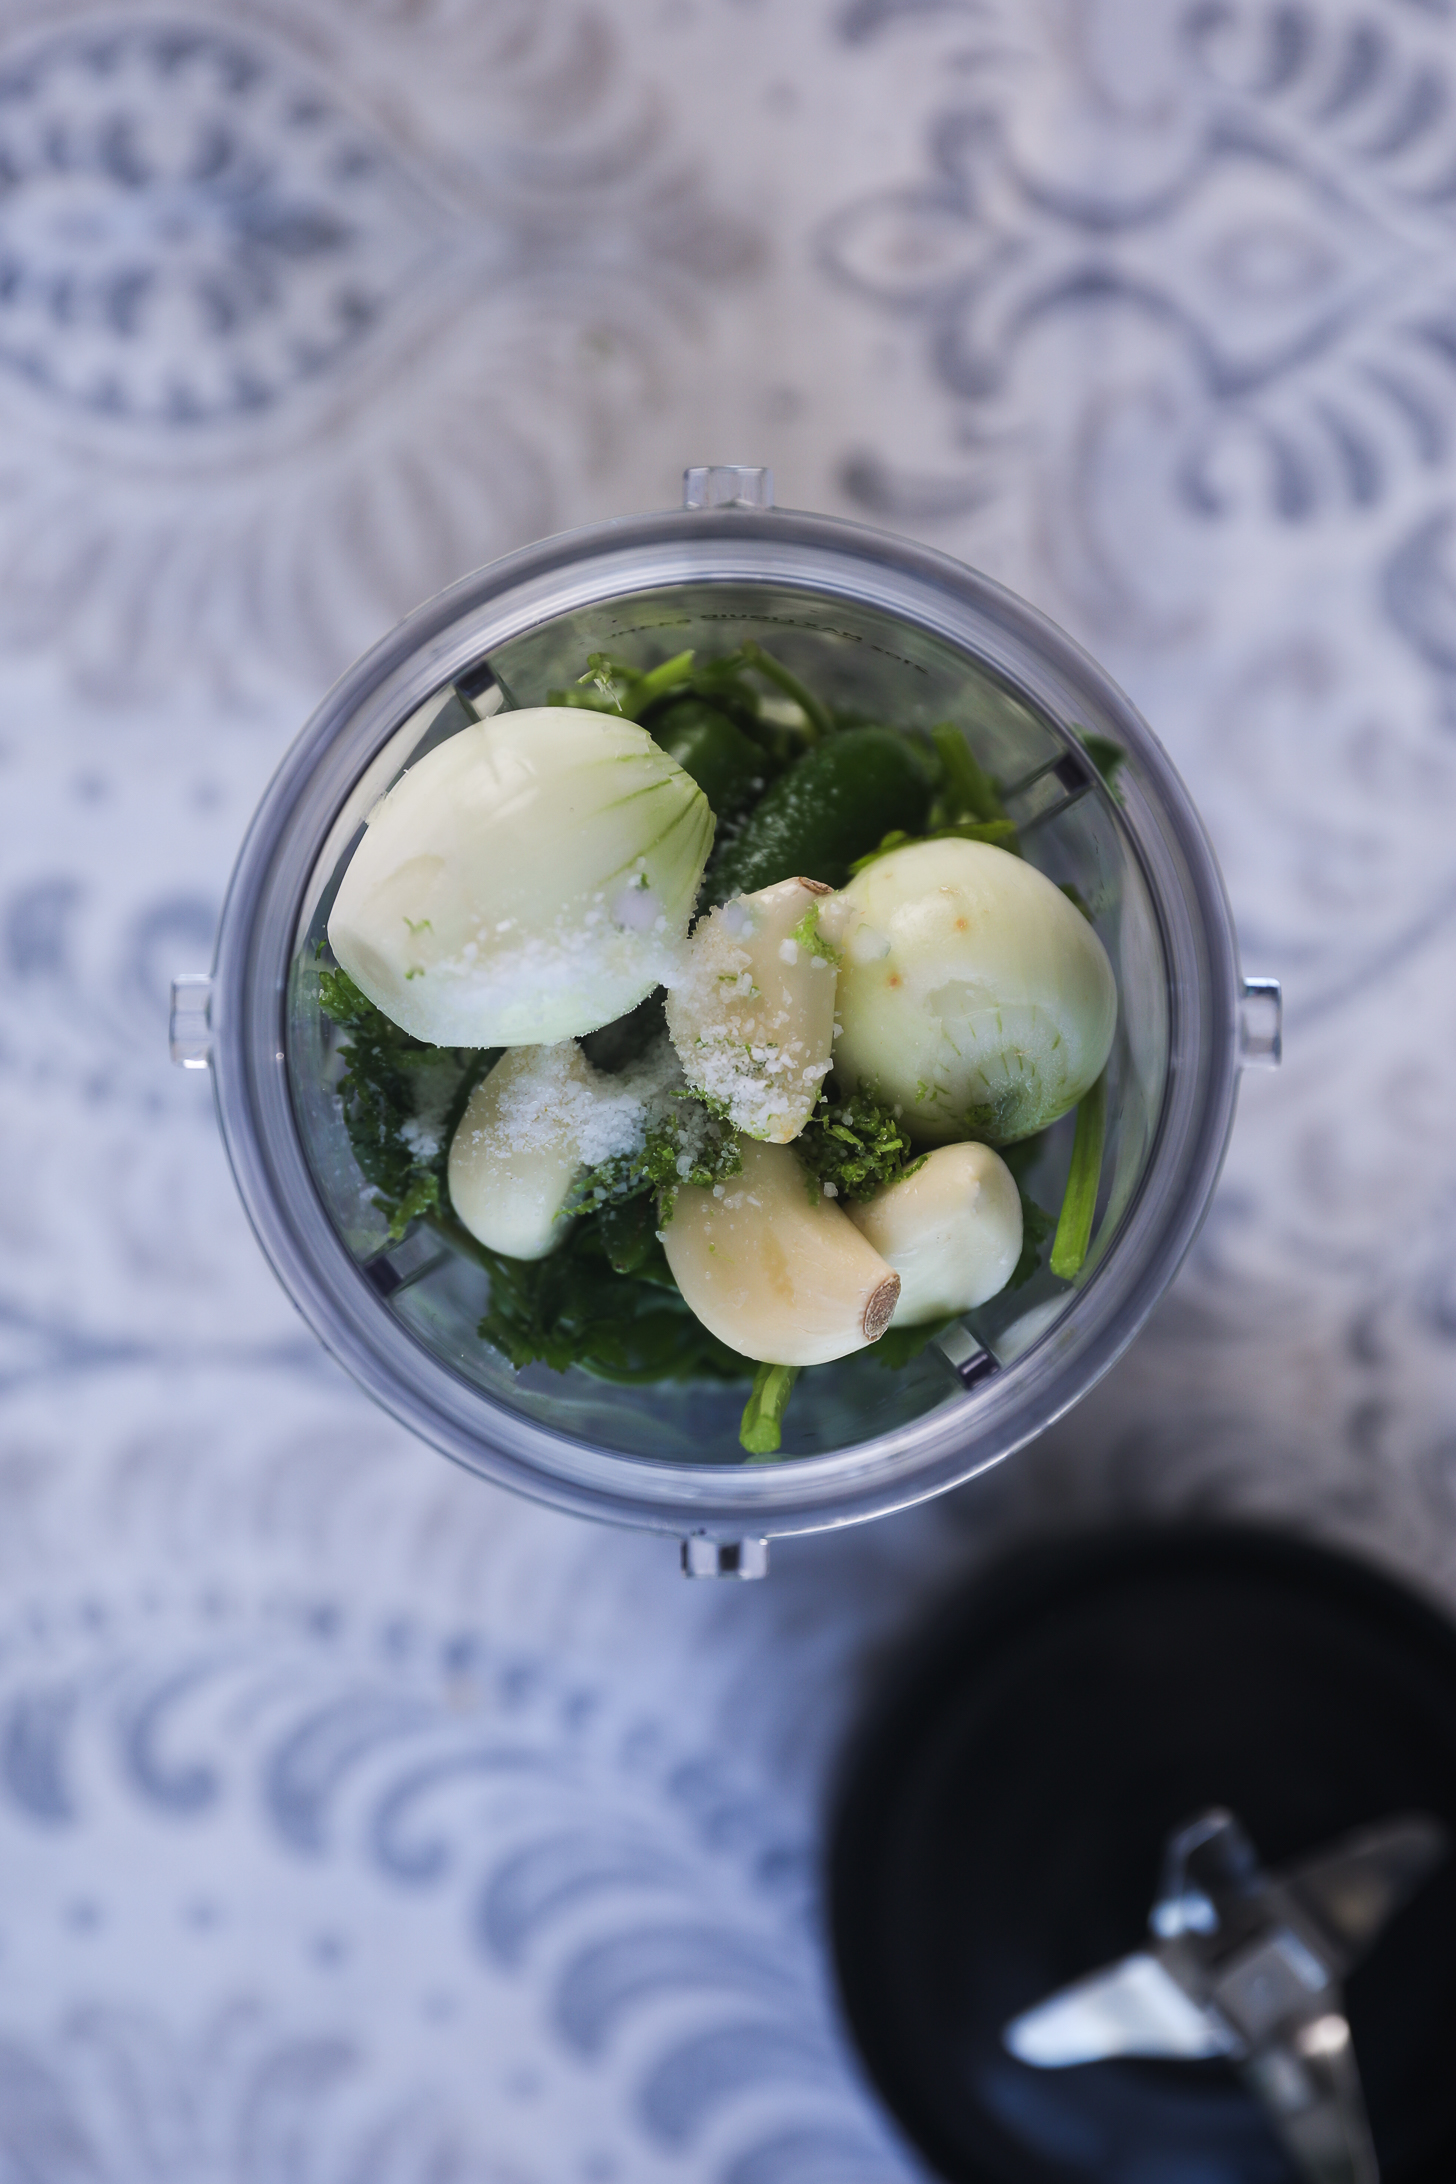 Top view image of a blender cup of greens, shallots, garlic and salt.